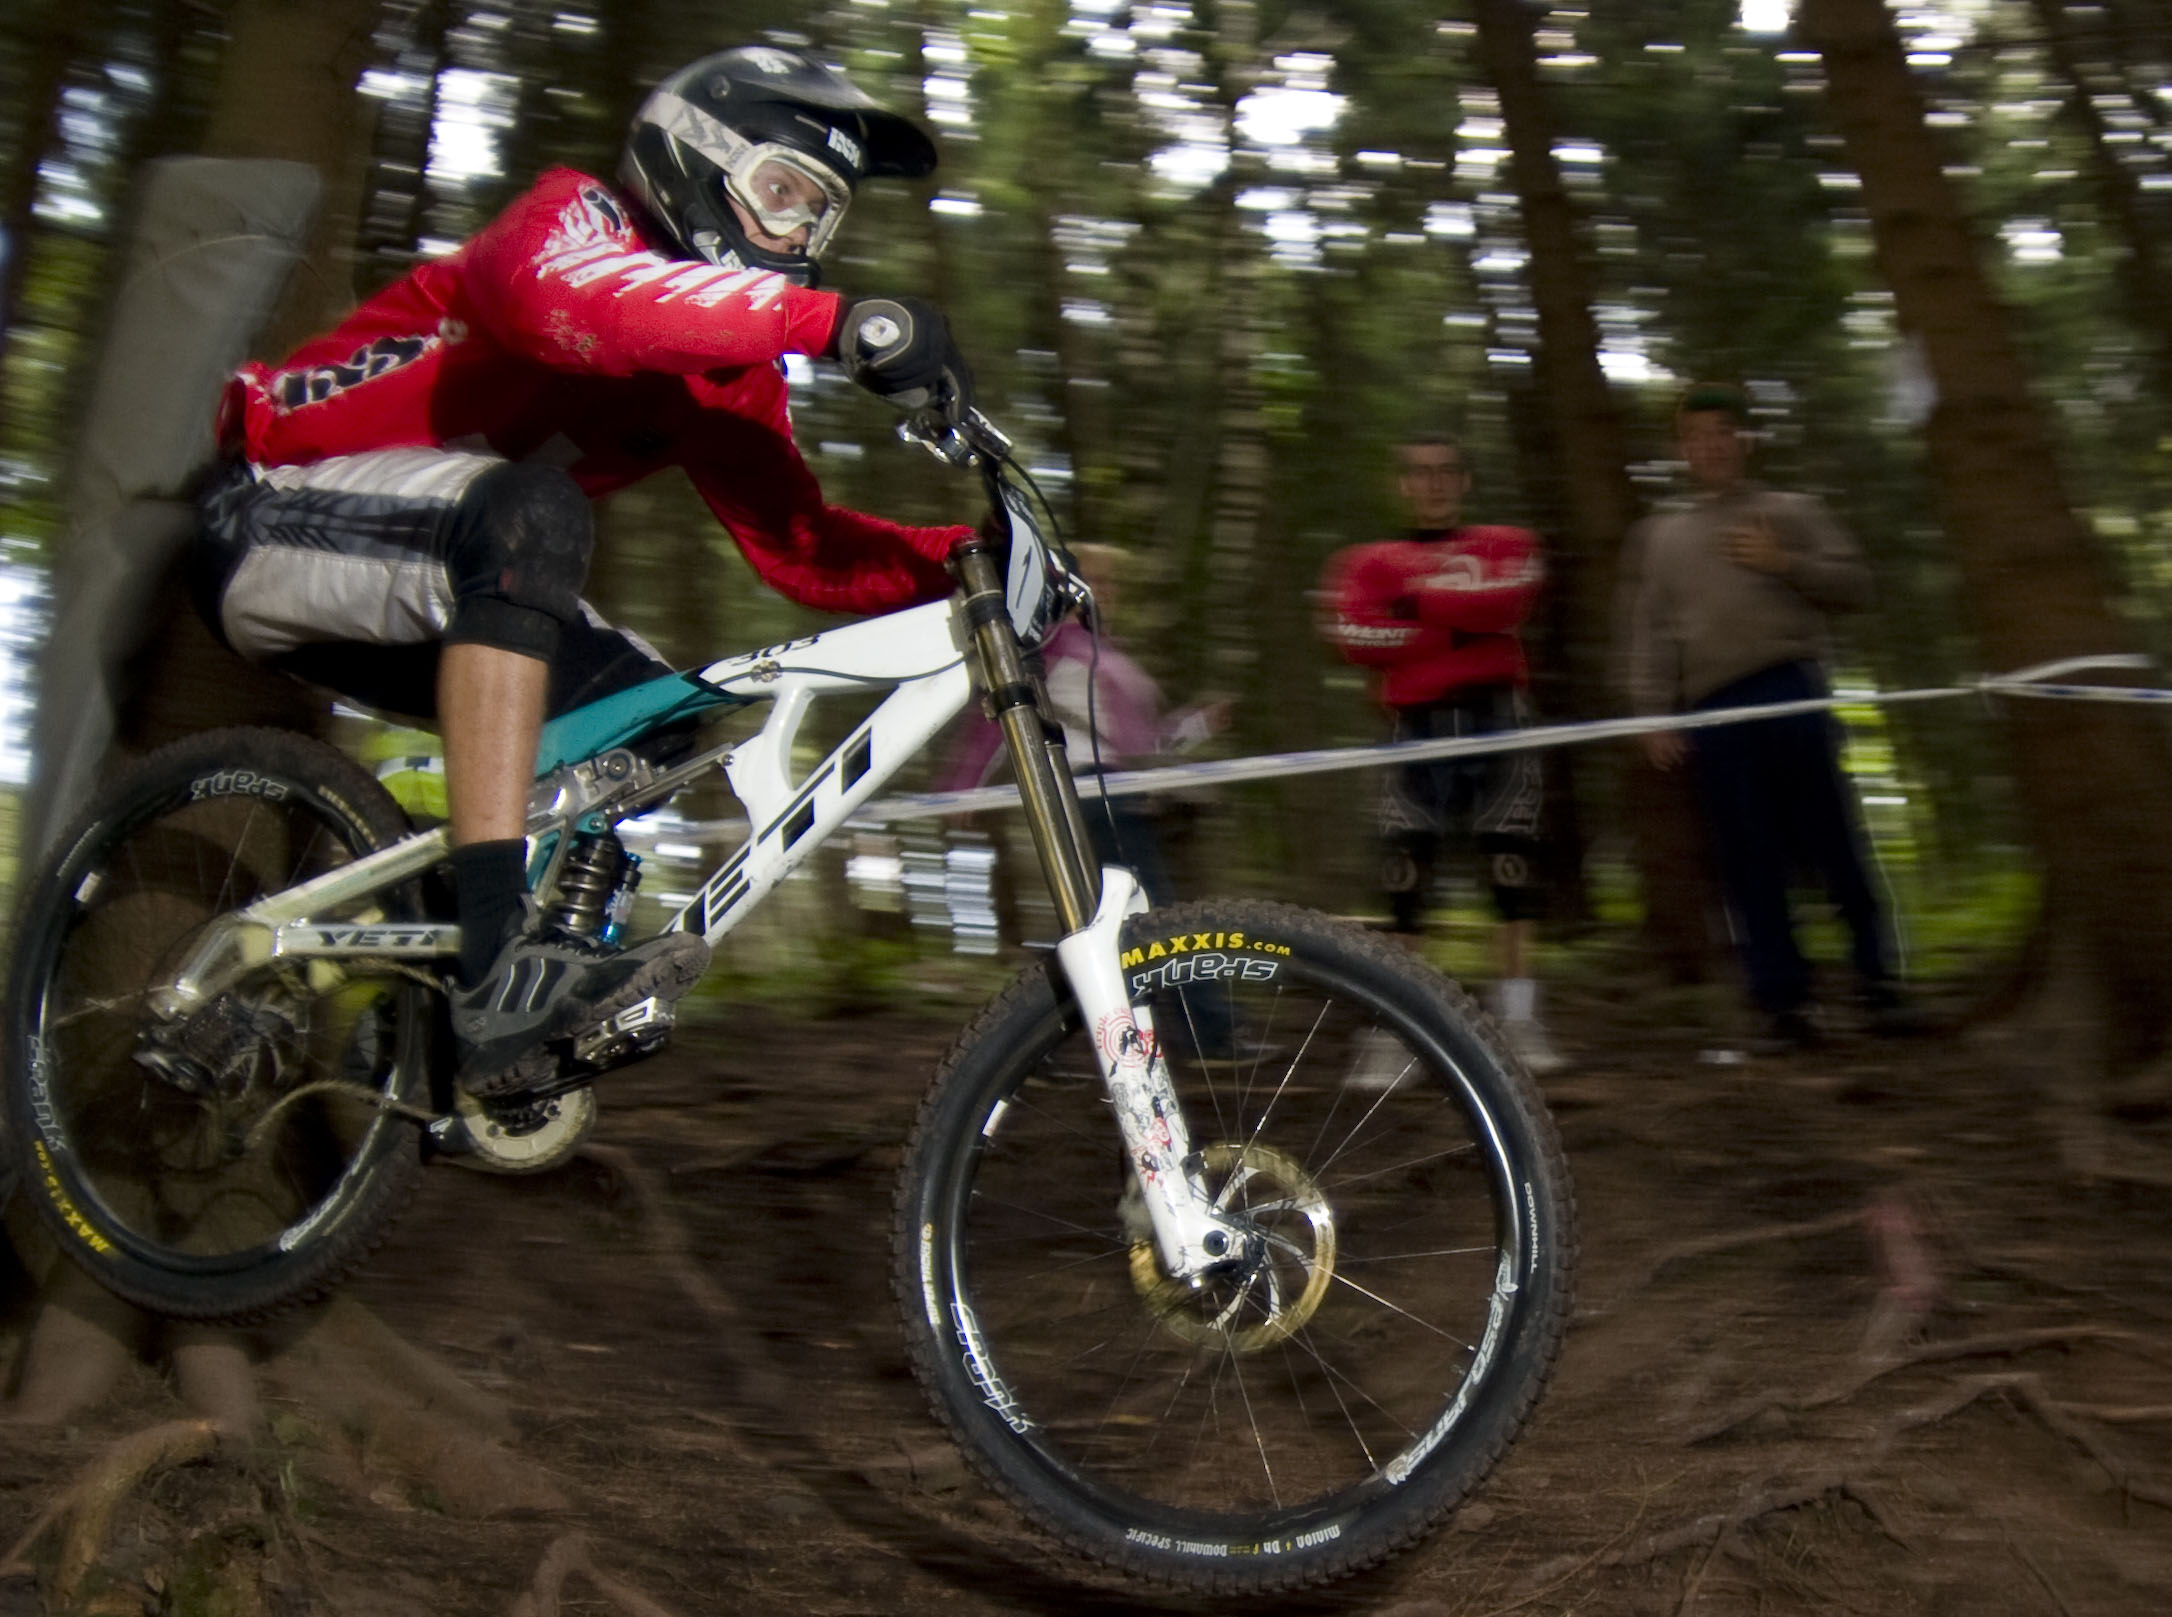 Nick Beer scores another win at the iXS European Downhill Cup